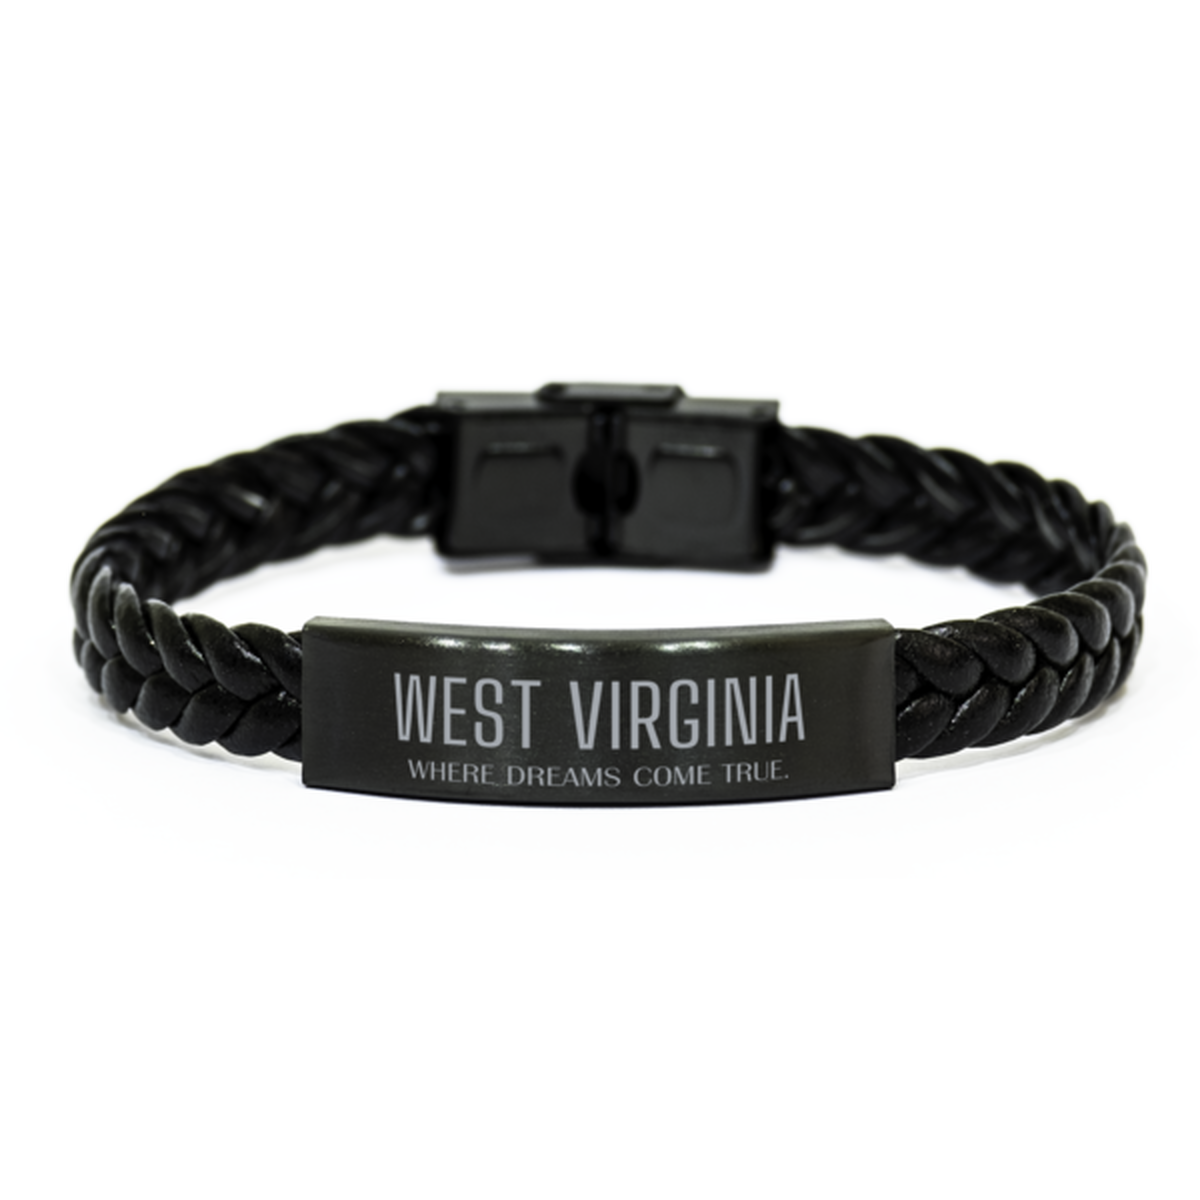 Love West Virginia State Braided Leather Bracelet, West Virginia Where dreams come true, Birthday Inspirational Gifts For West Virginia Men, Women, Friends